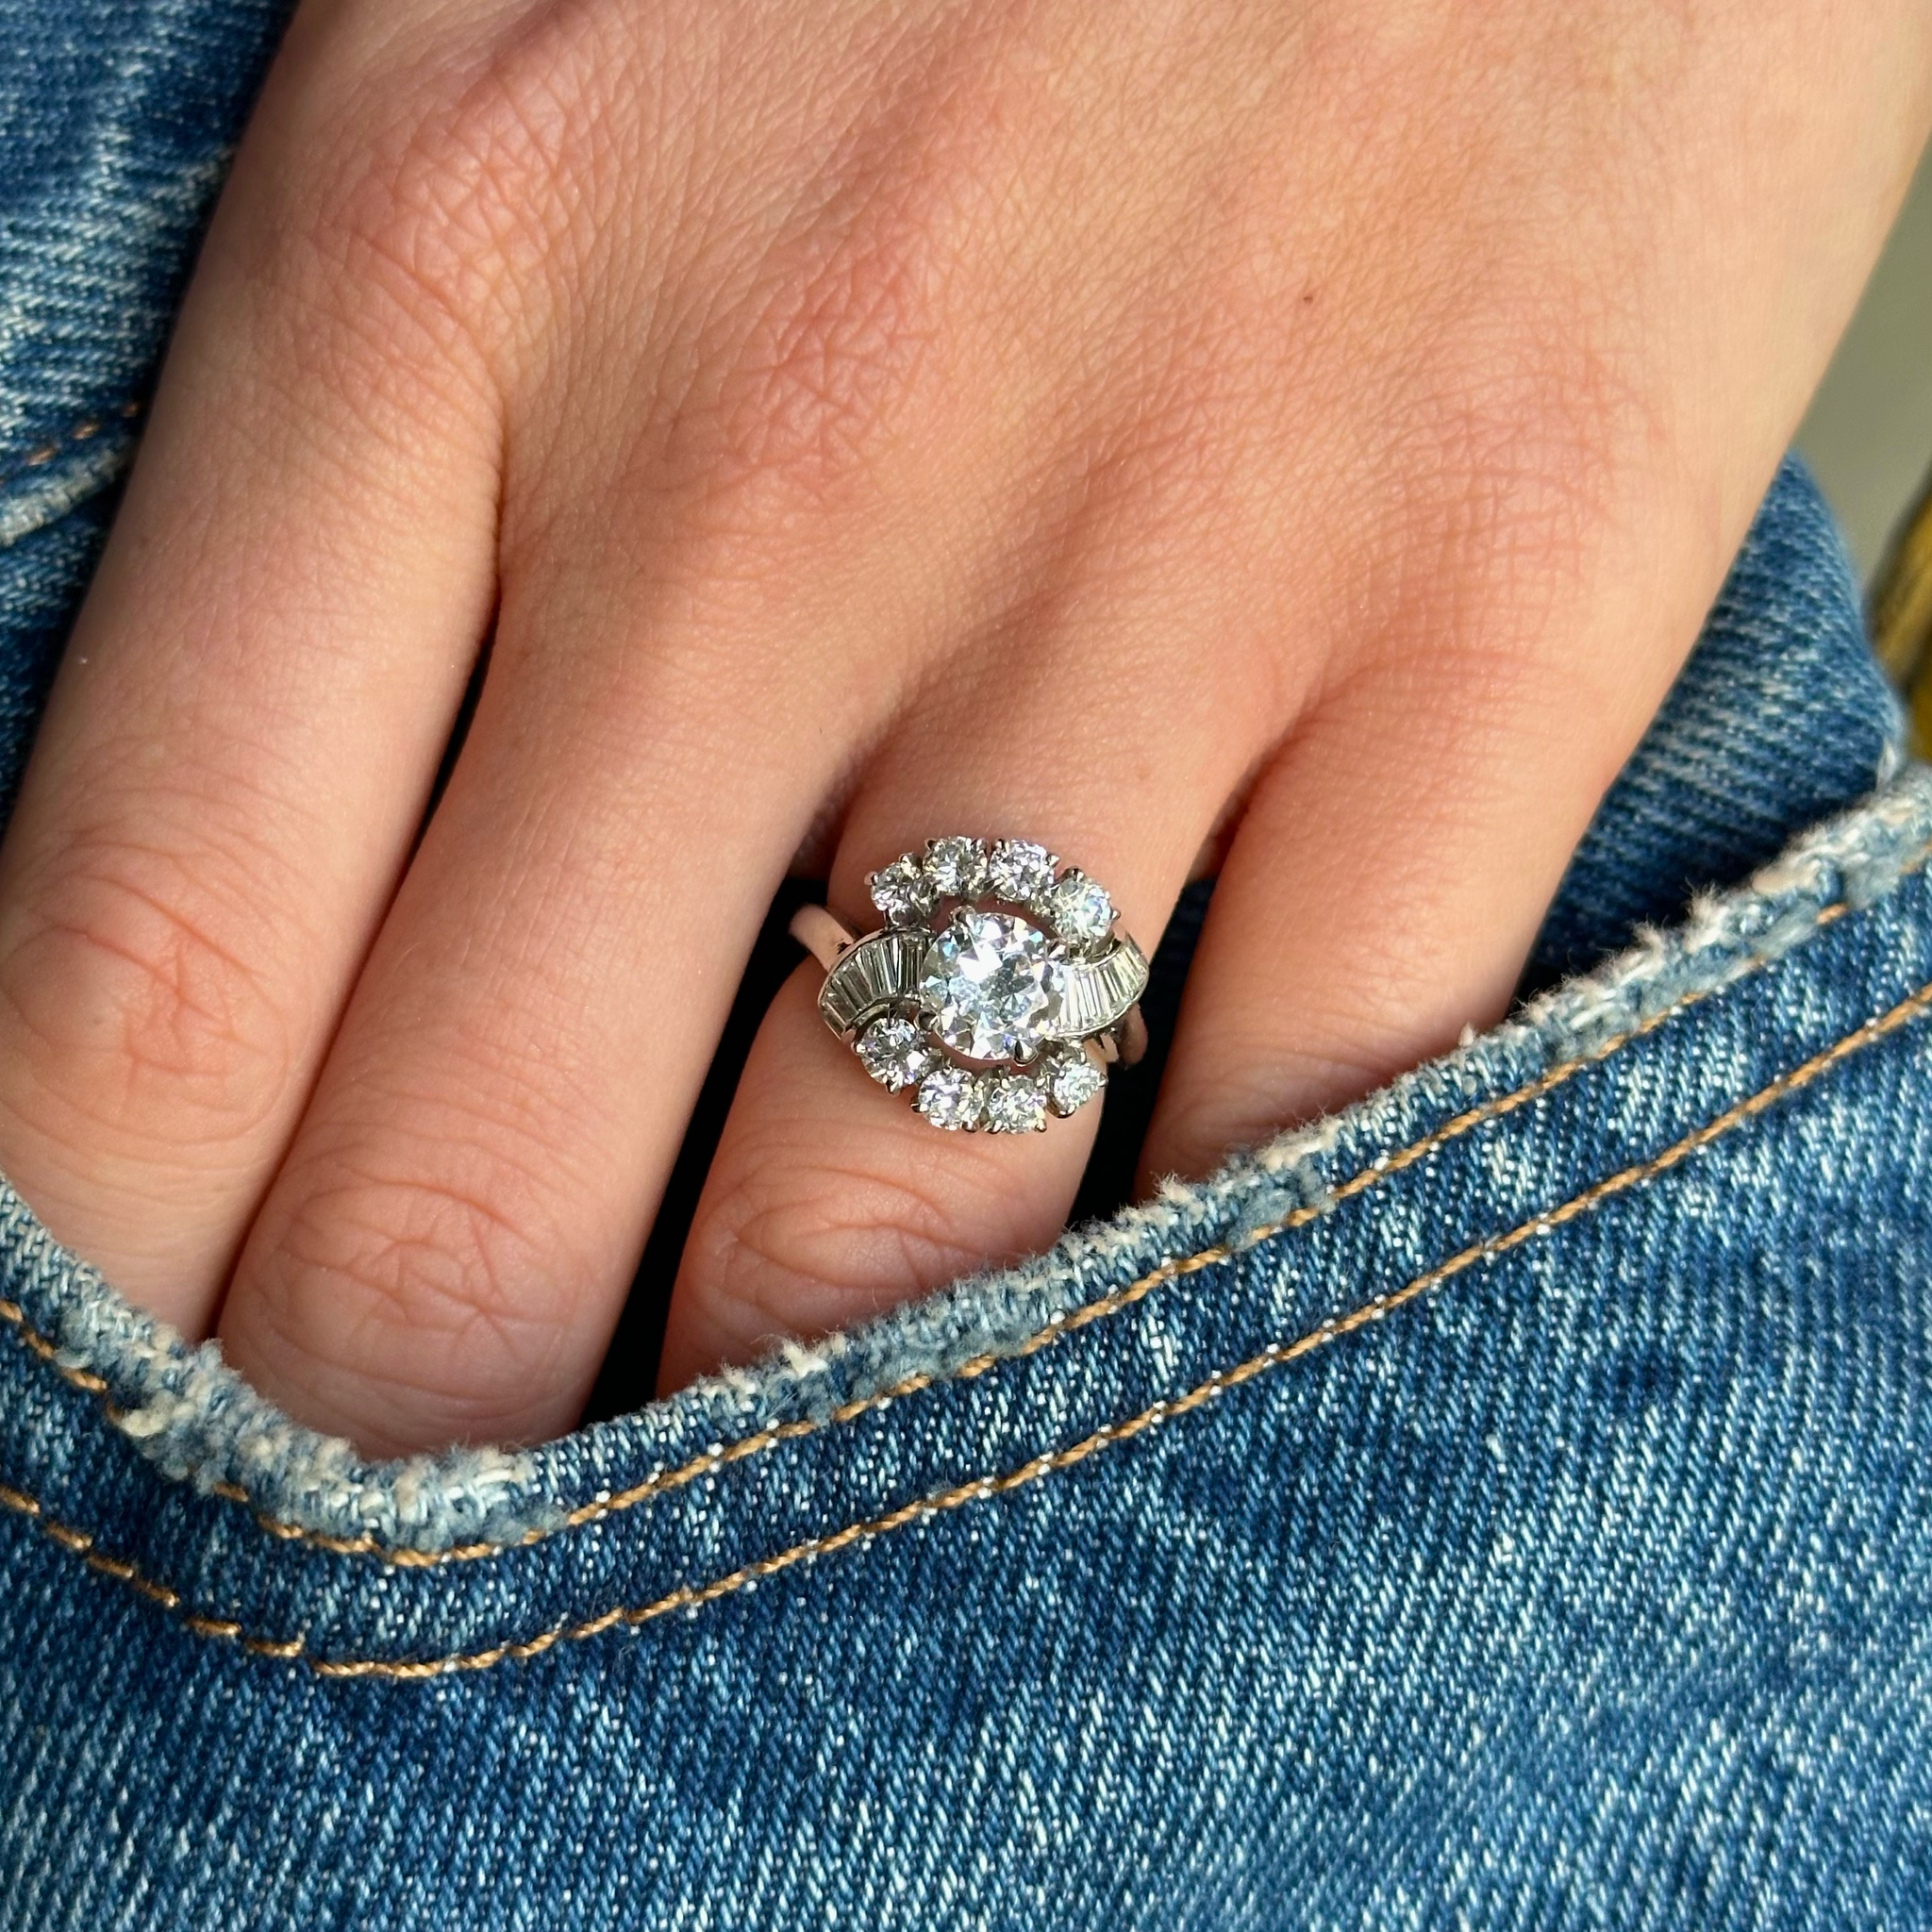 Cartier diamond engagement ring worn on hand in pocket of jeans